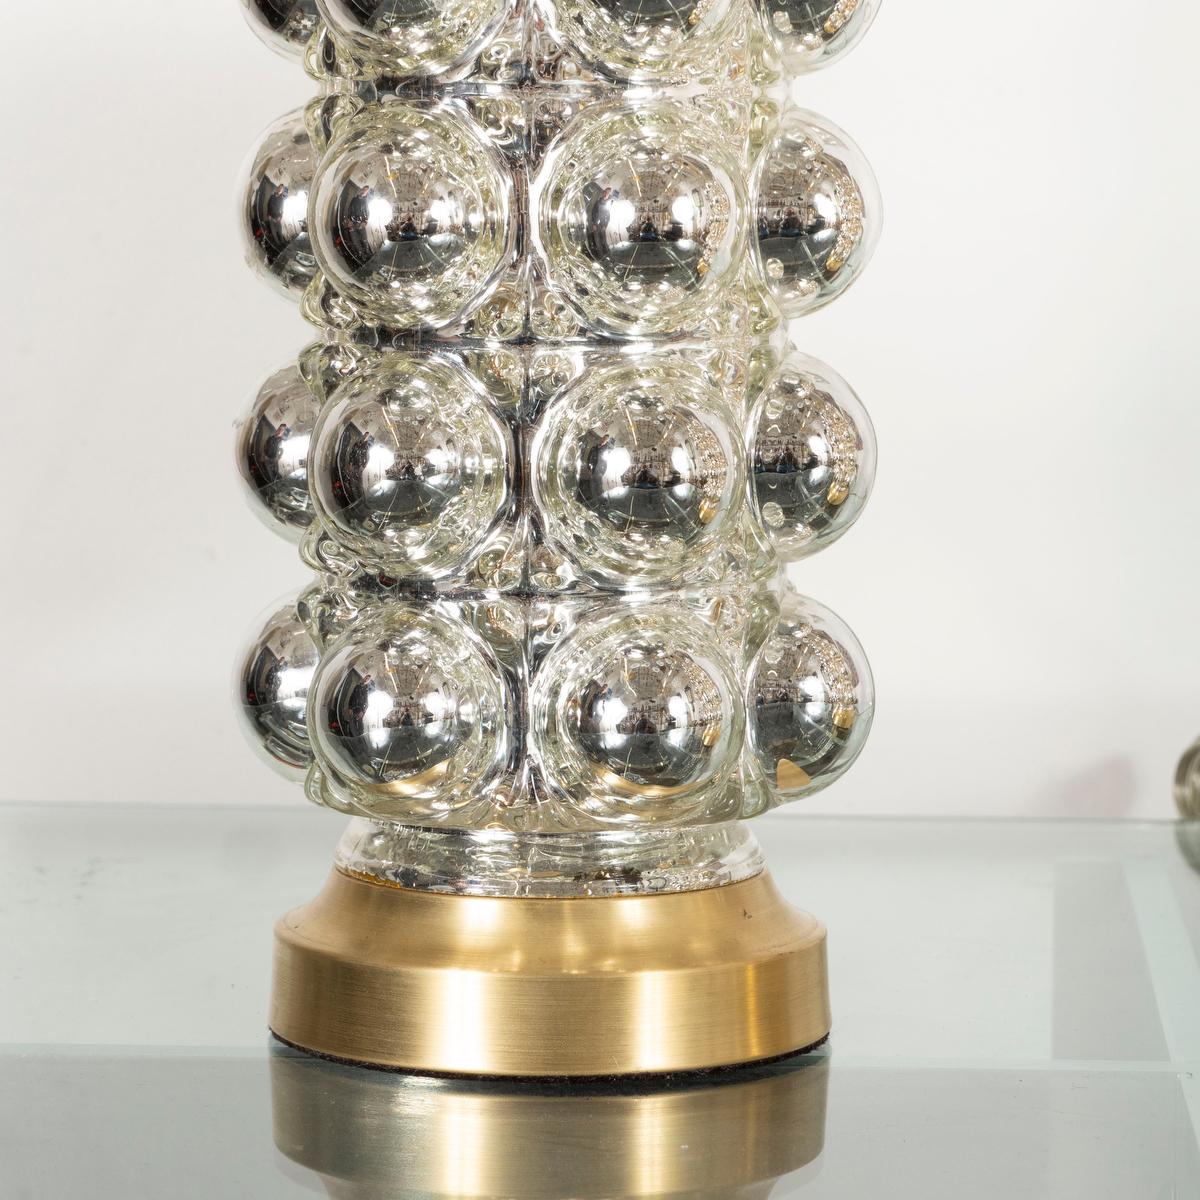 Pair of Cylindrical Bubble Mercury Glass Lamps In Good Condition For Sale In Tarrytown, NY